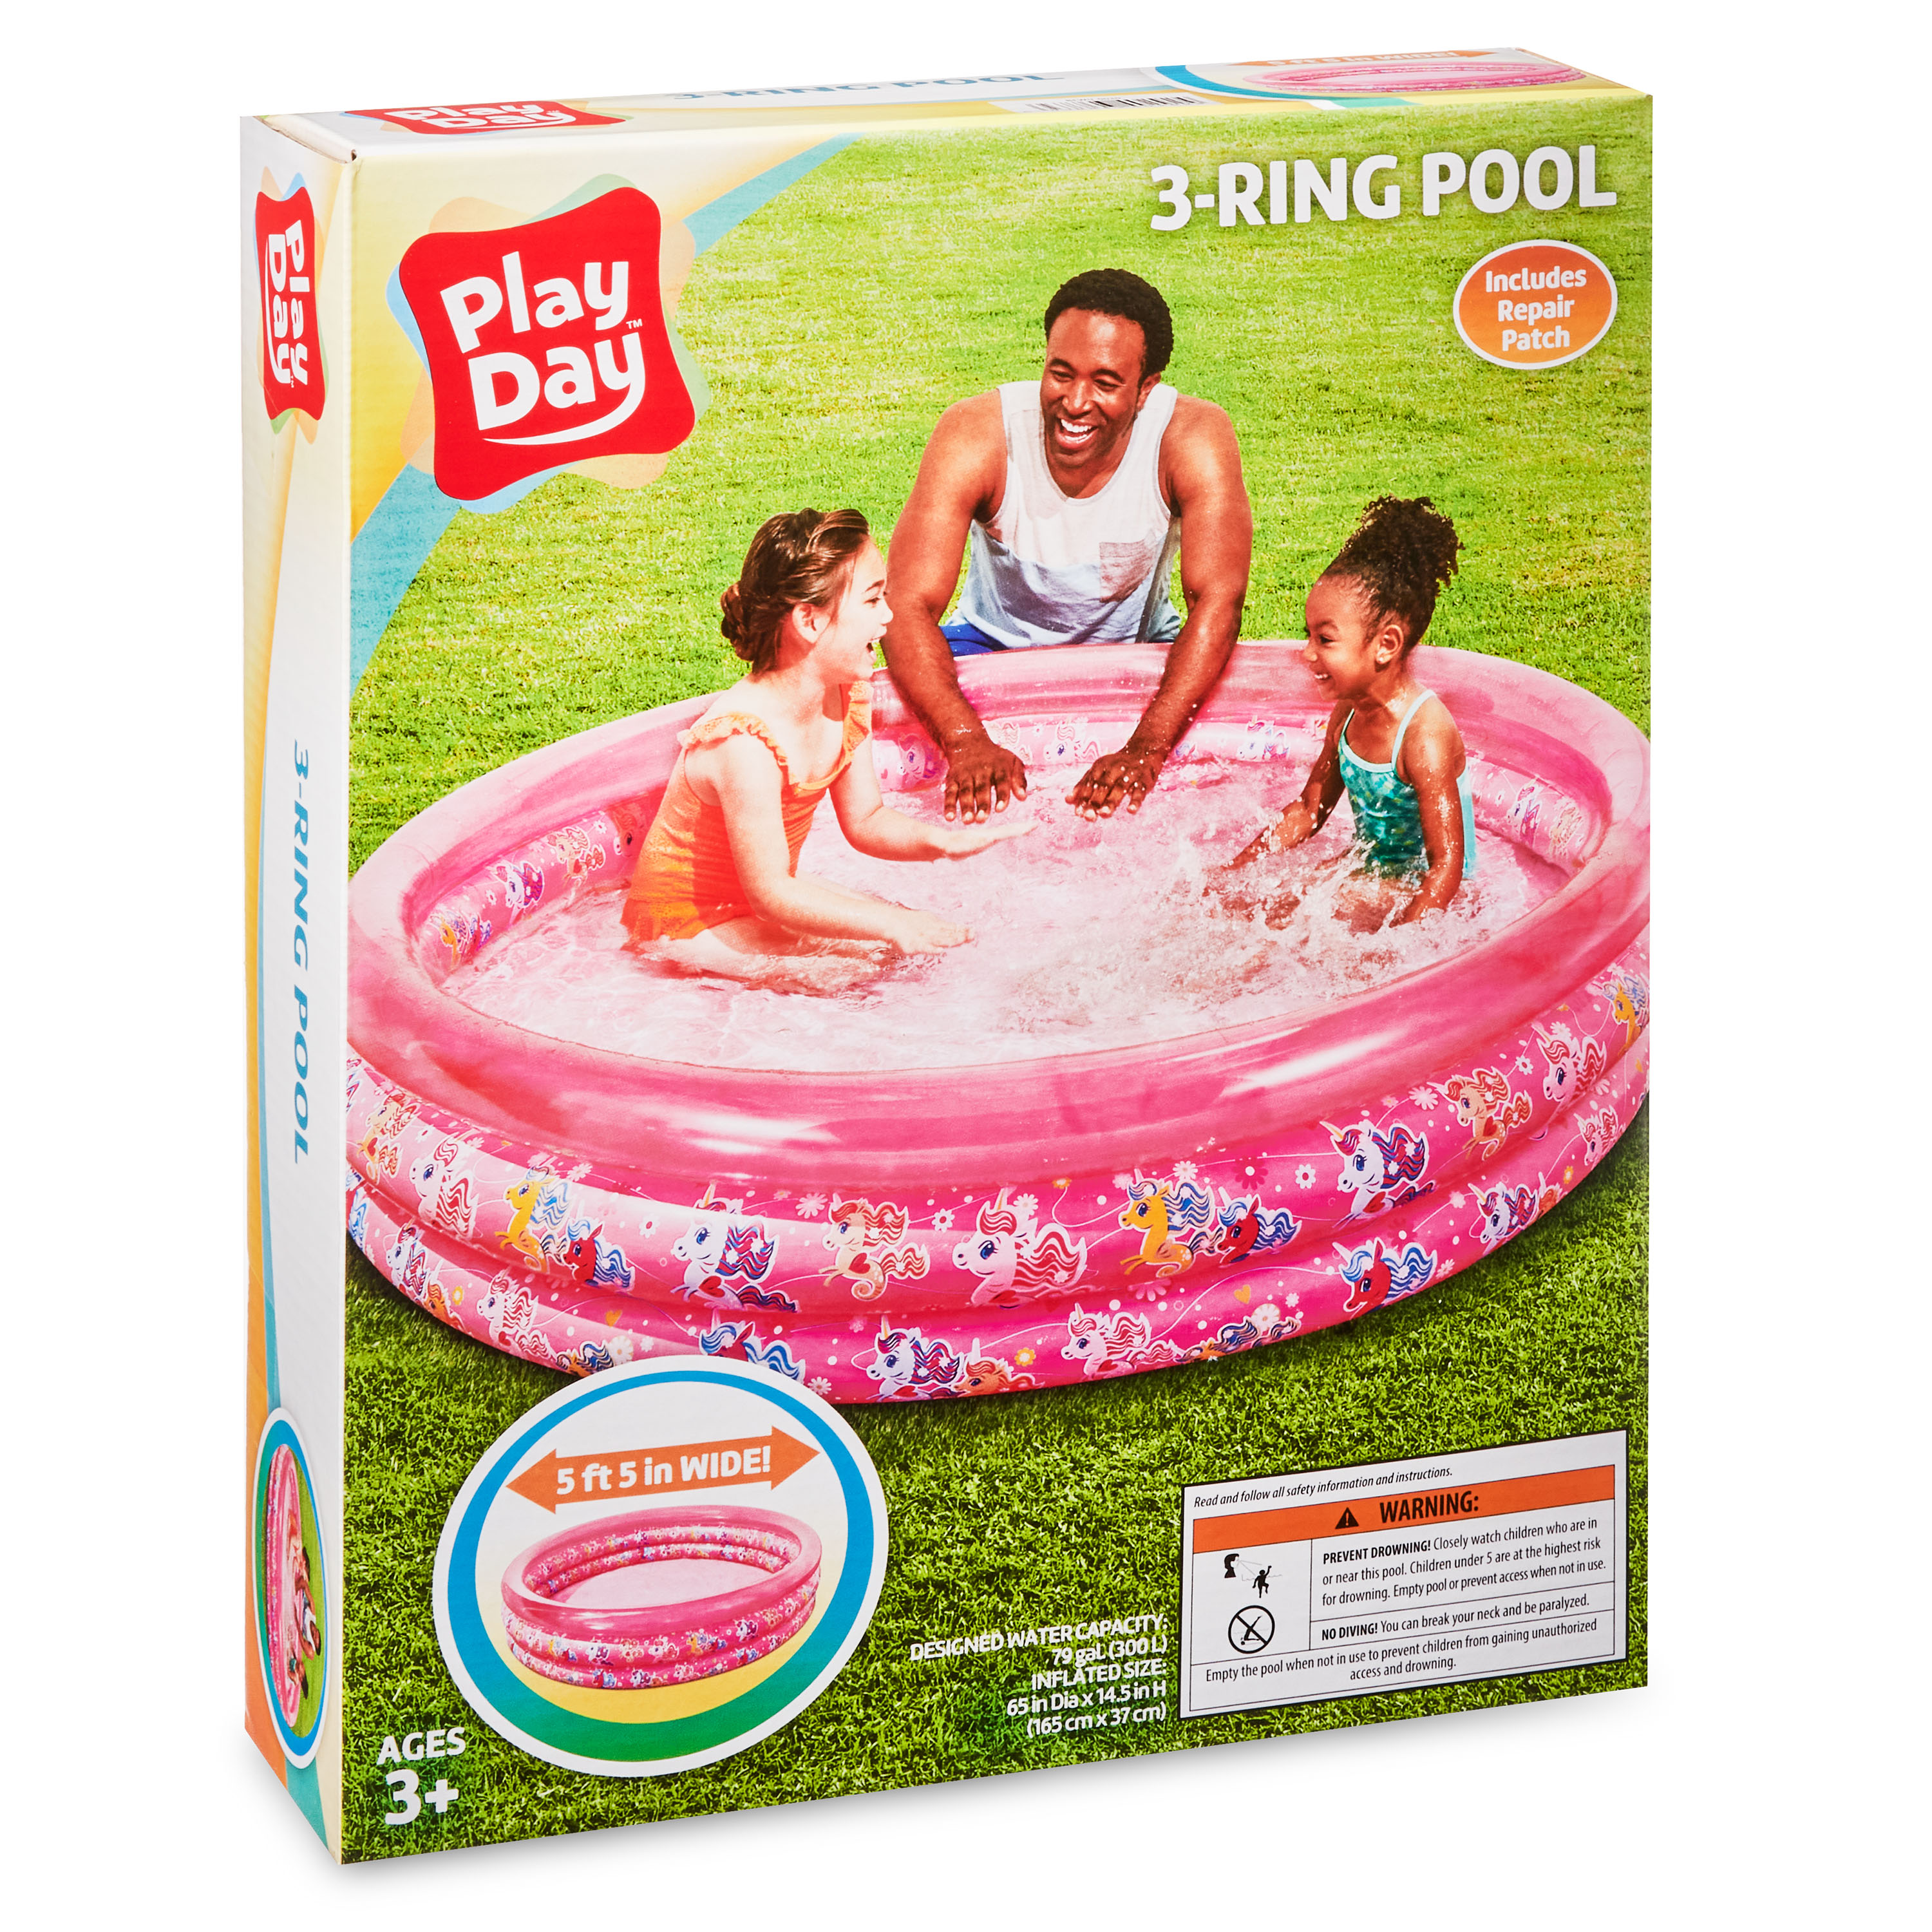 Play Day 3 Ring Unicorn Pool, Pink - image 5 of 5